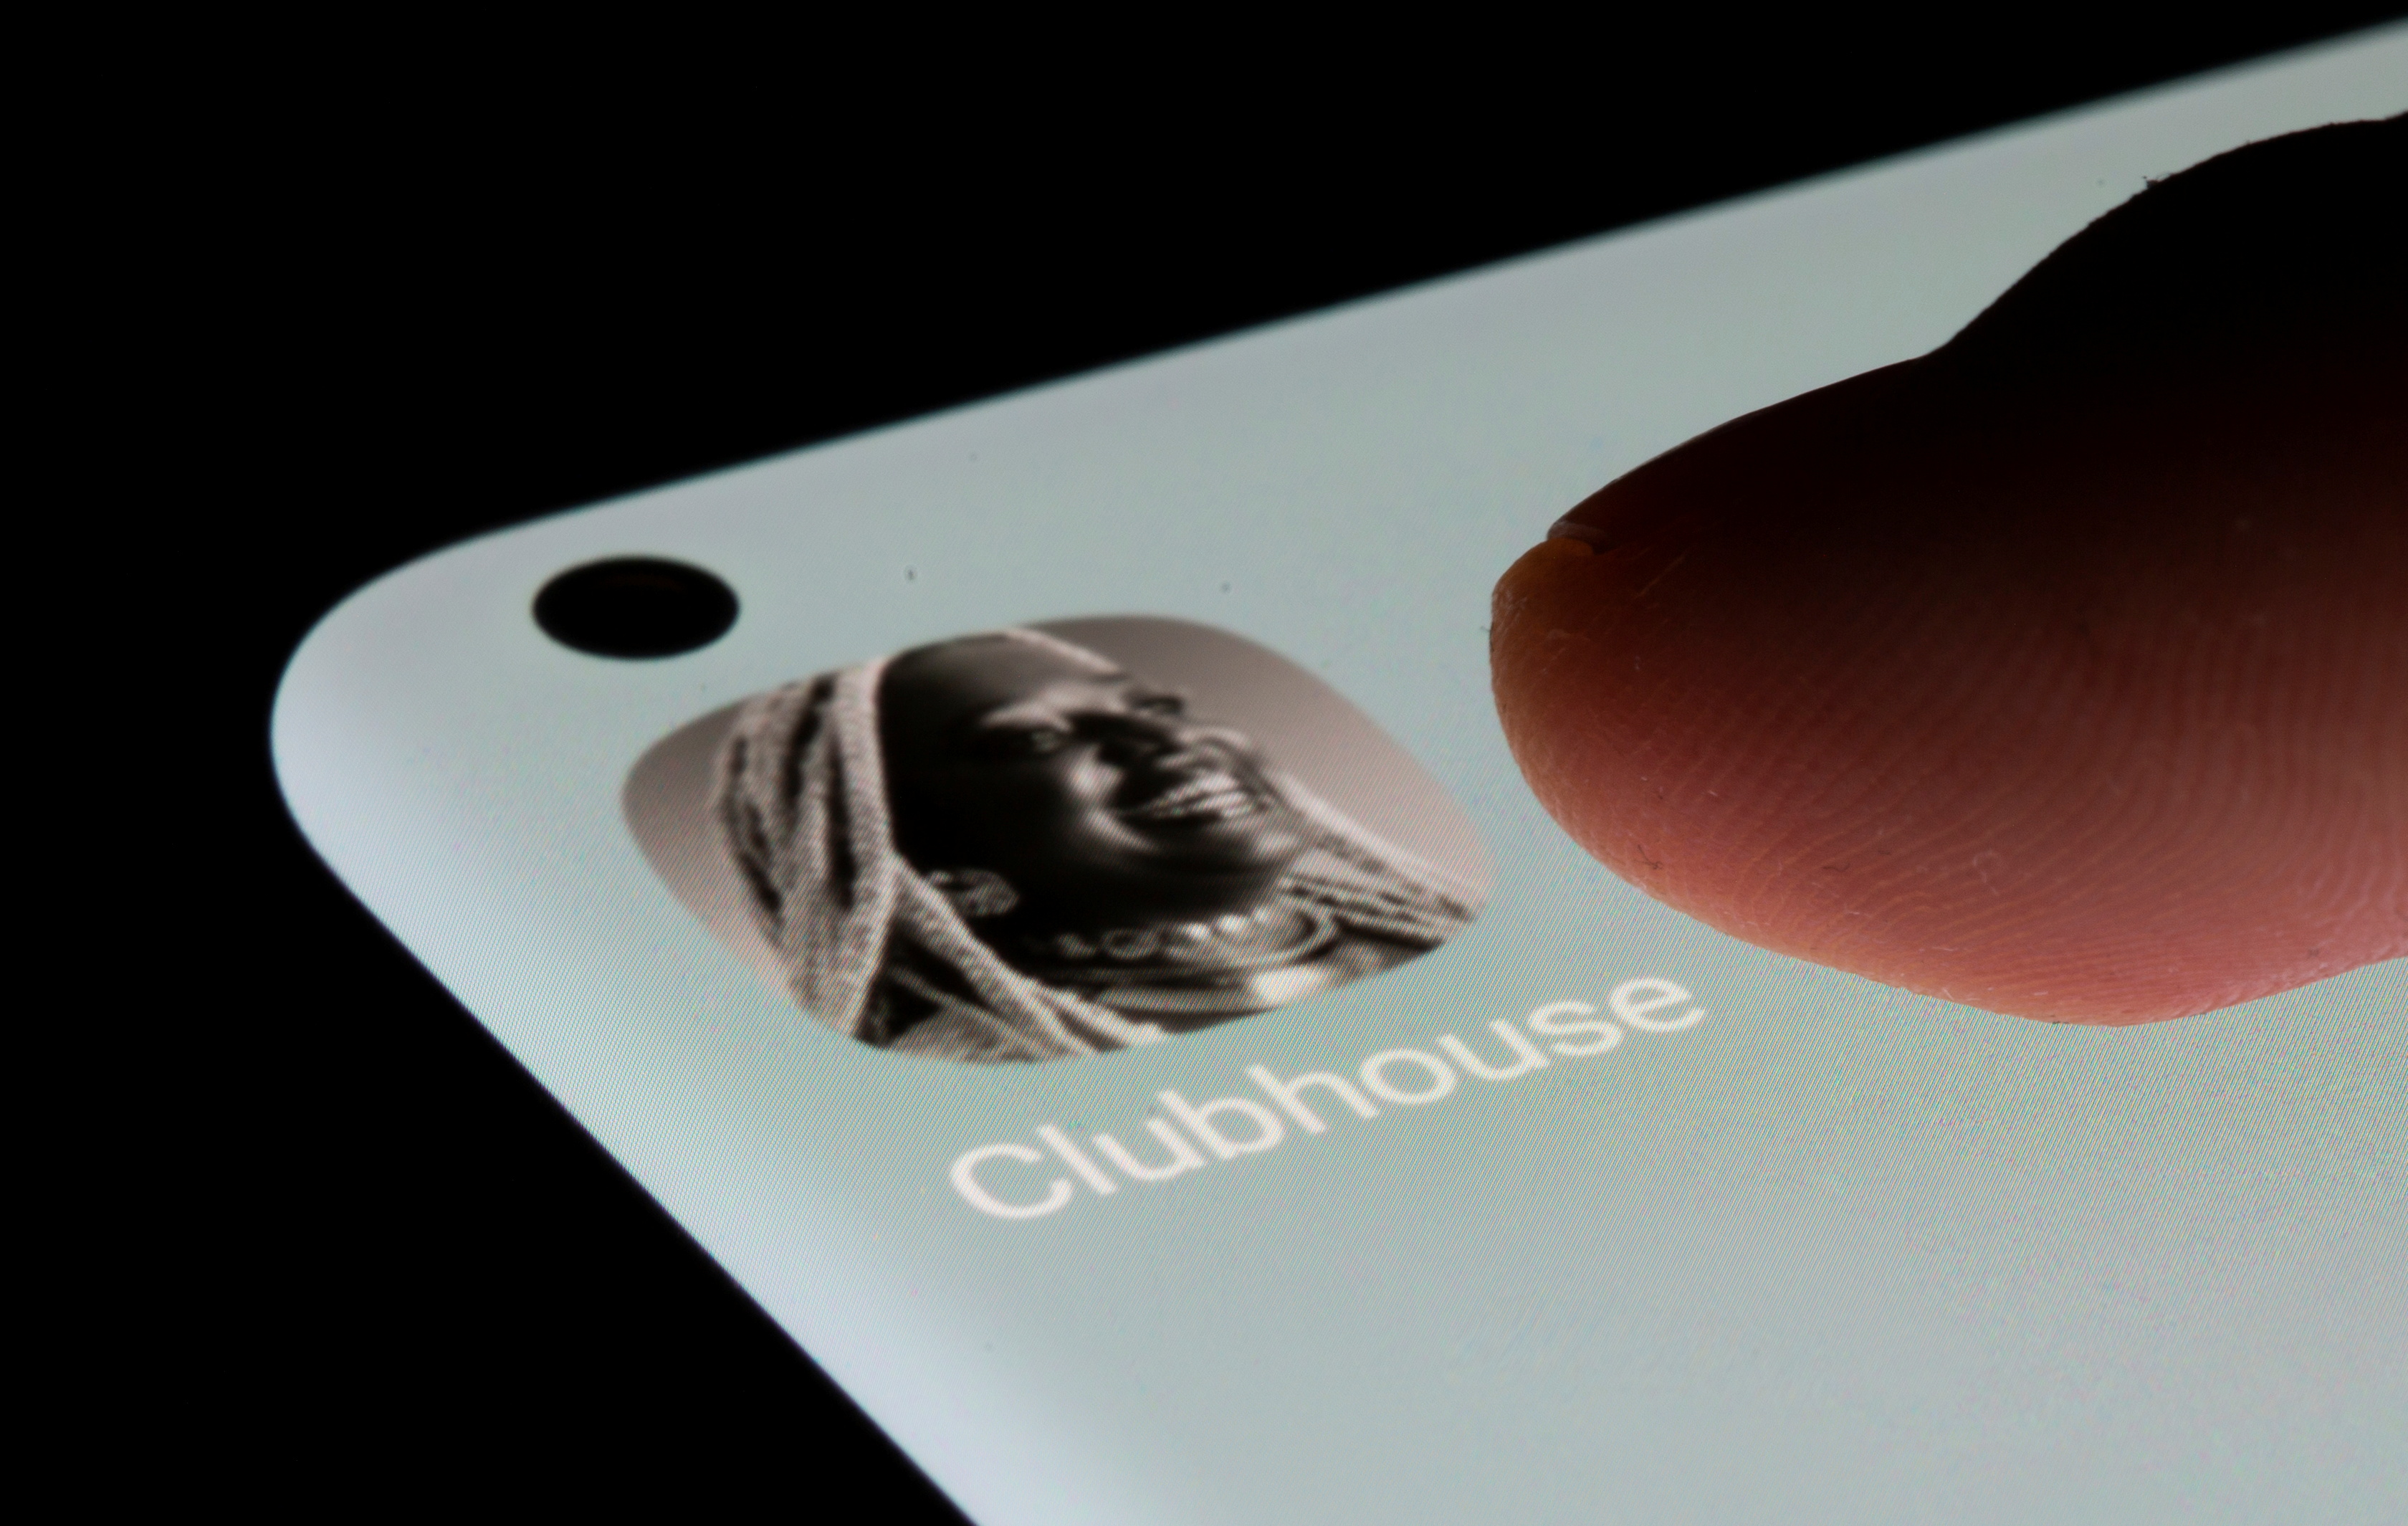 Clubhouse app is seen on a smartphone in this illustration